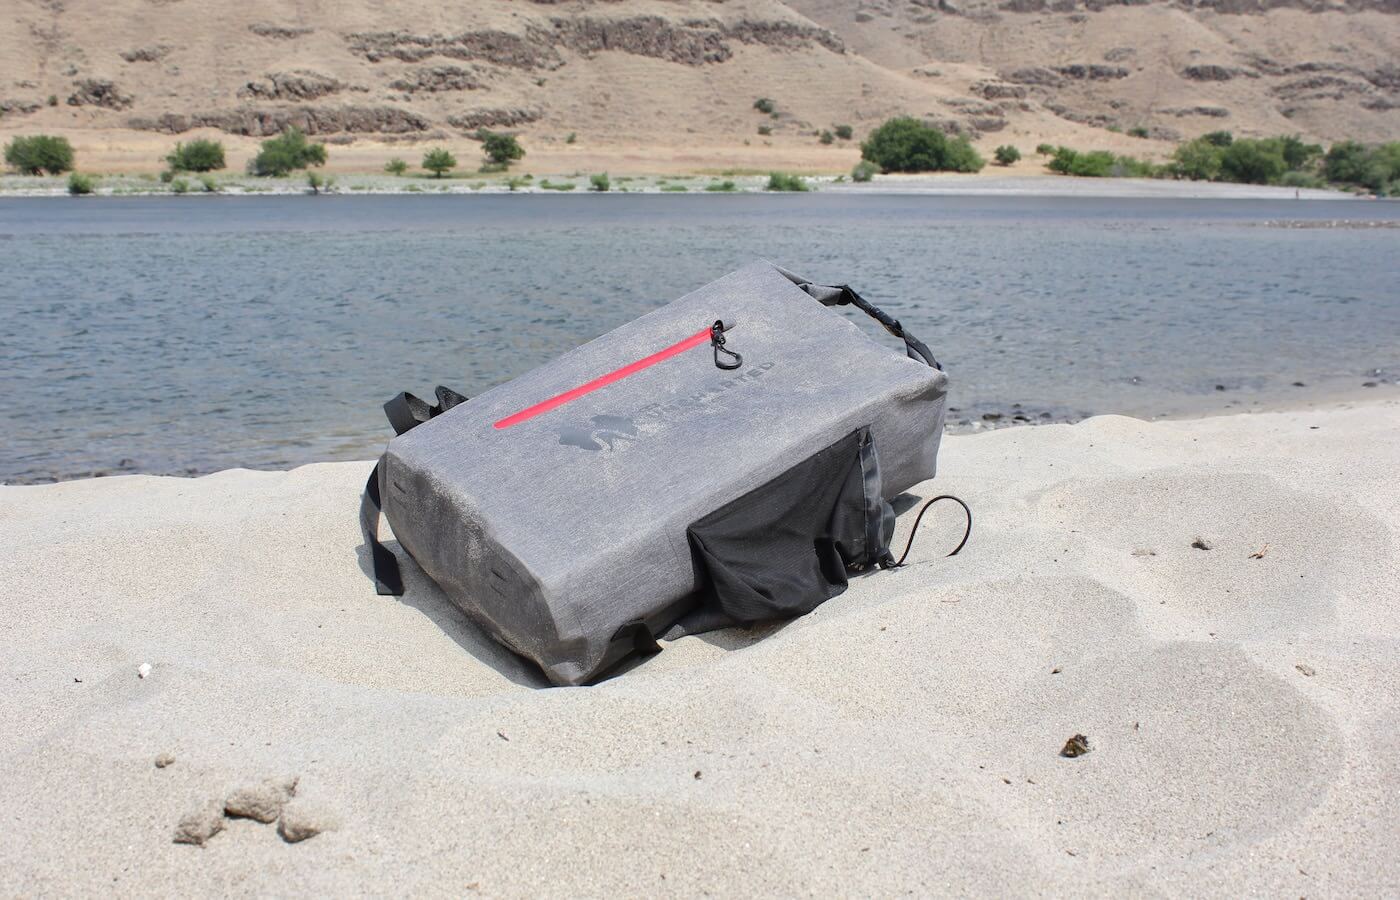 This photo shows the SEVENTY2 Survival System on a sandy beach.